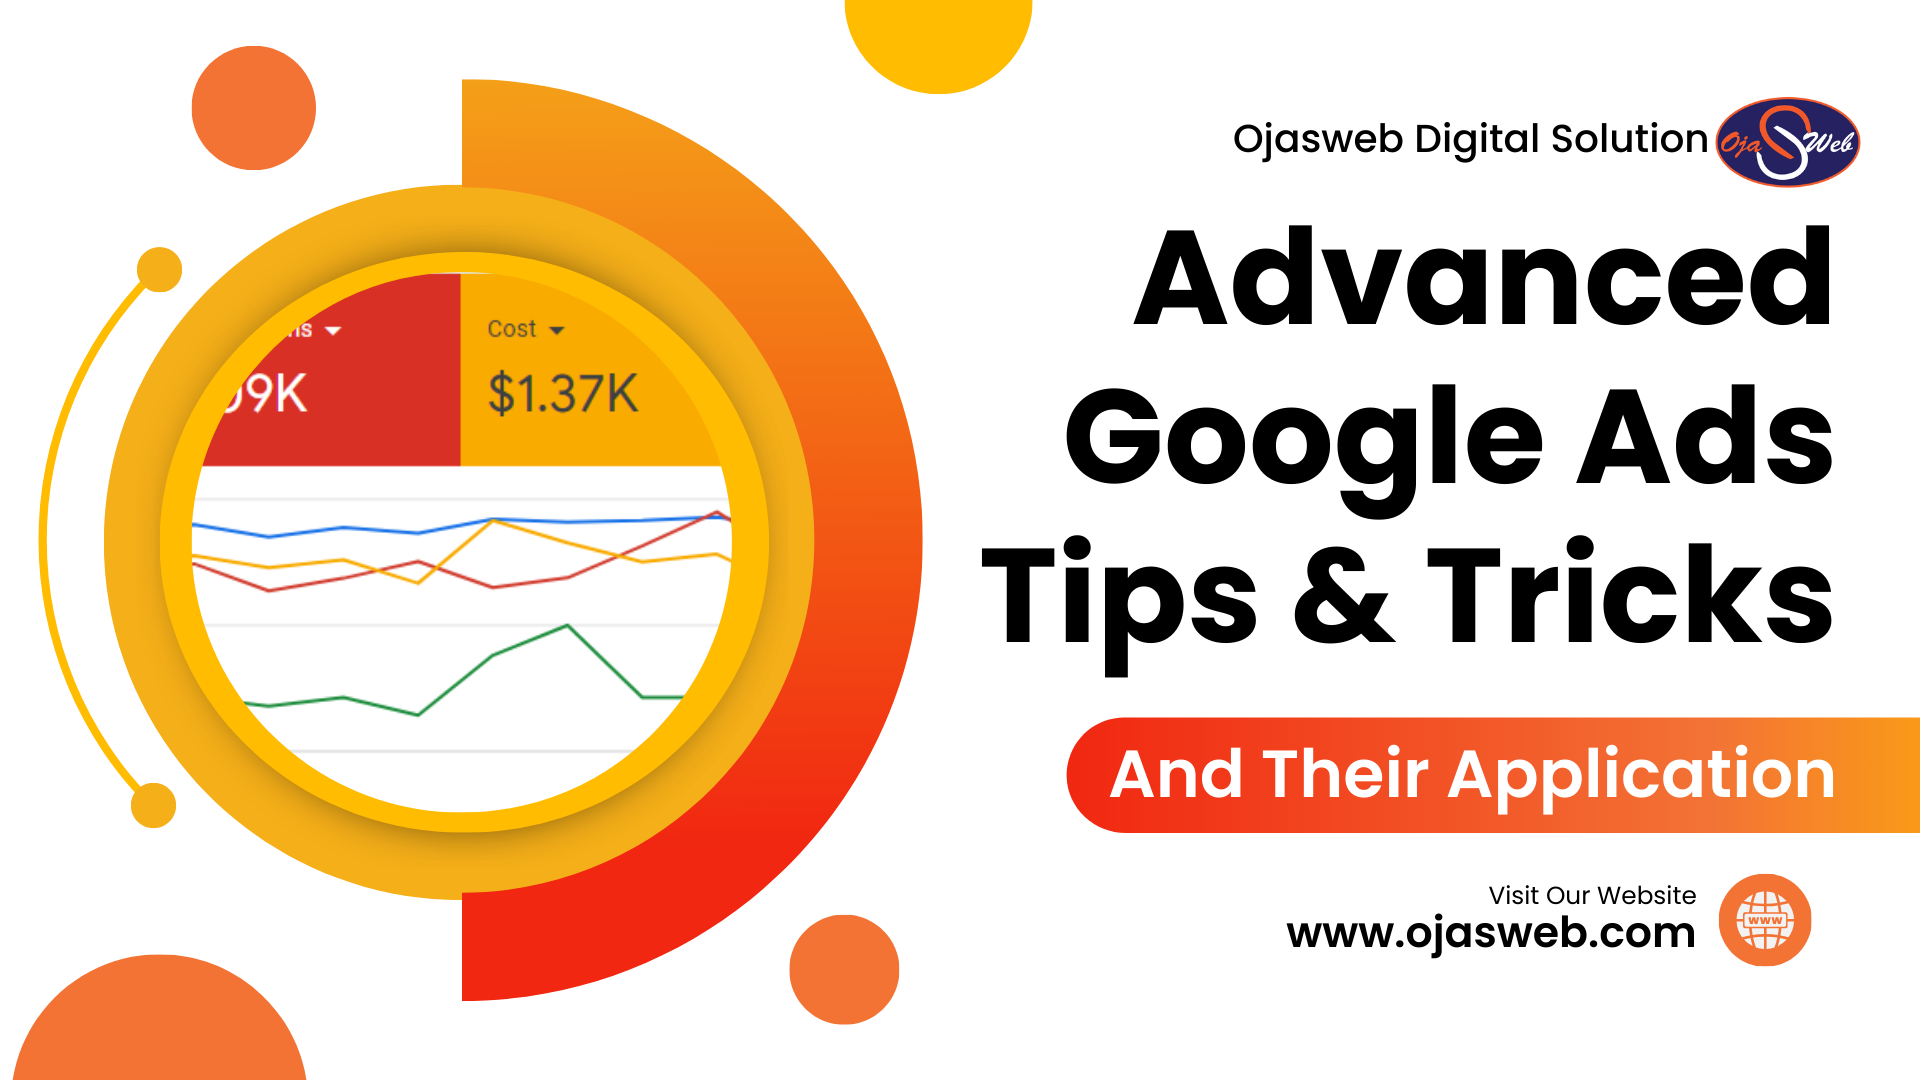 The Advanced Google Ads Tips & Tricks To 10X Your Results